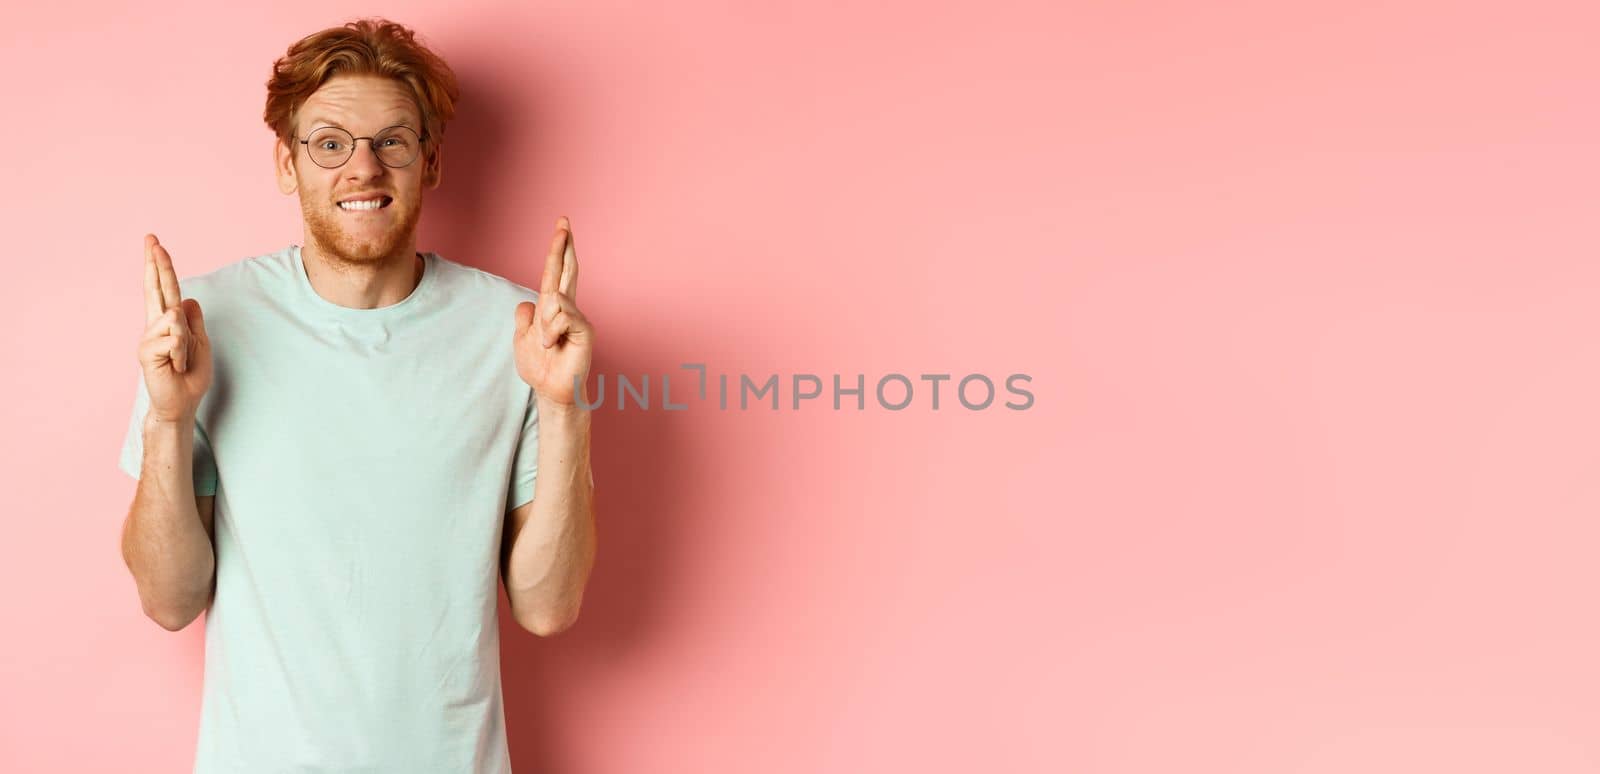 Worried redhead man waiting for results, expecting something with fingers crossed, biting finger and looking at something risky, standing over pink background.